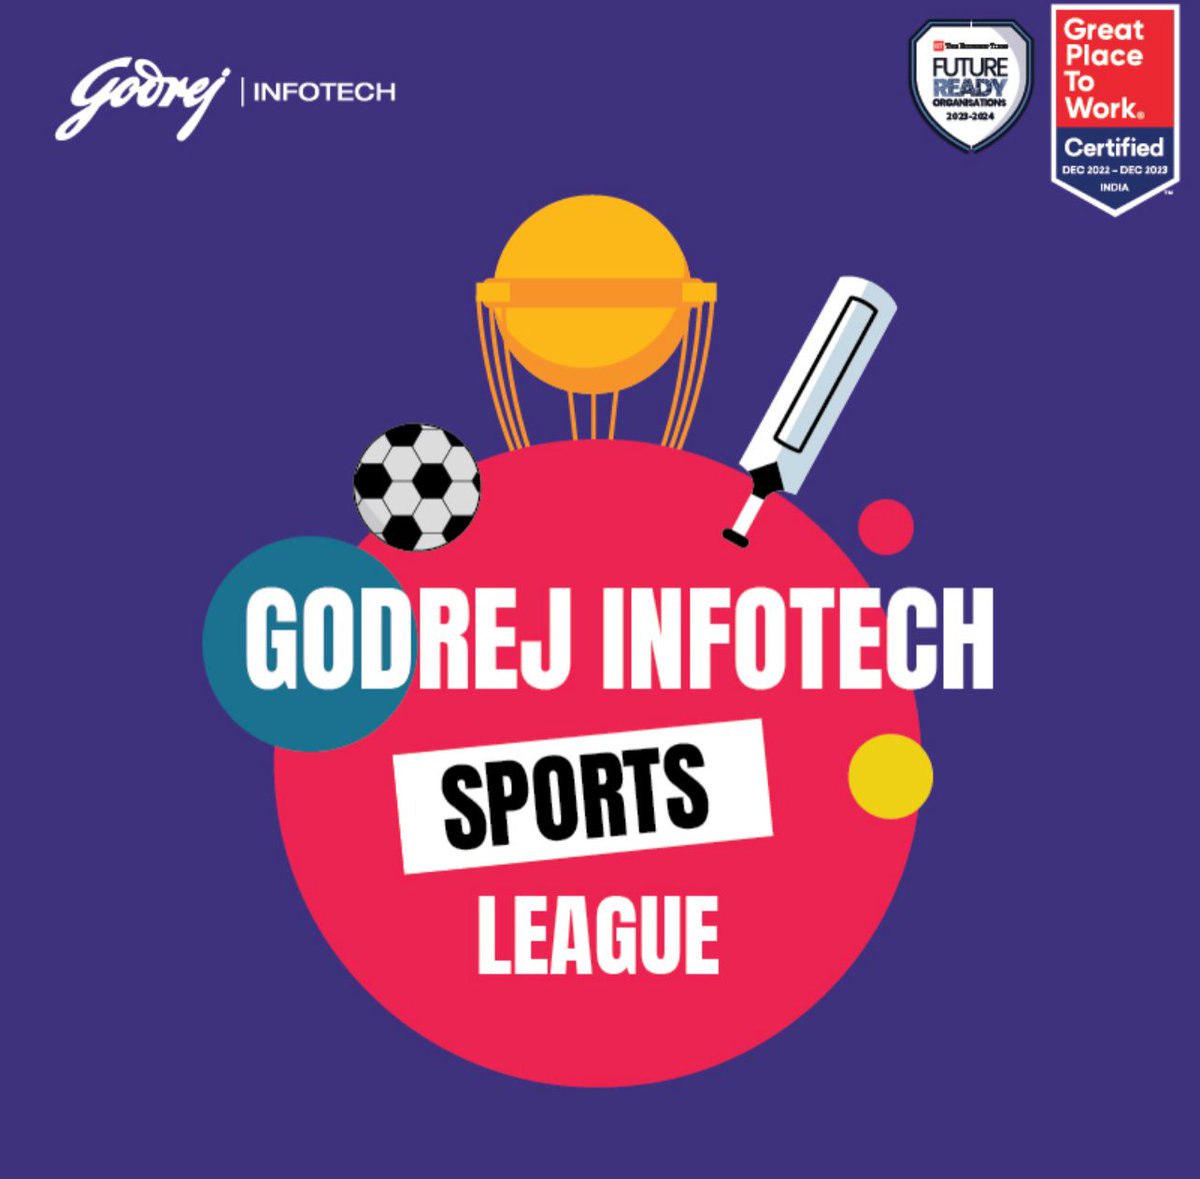 Godrej Infotech Ltd is all geared up for an action-packed day of sportsmanship! Tomorrow, we're kicking off our sports league with thrilling Football and Cricket competitions. So, stay tuned with us for exciting results and memorable clicks.